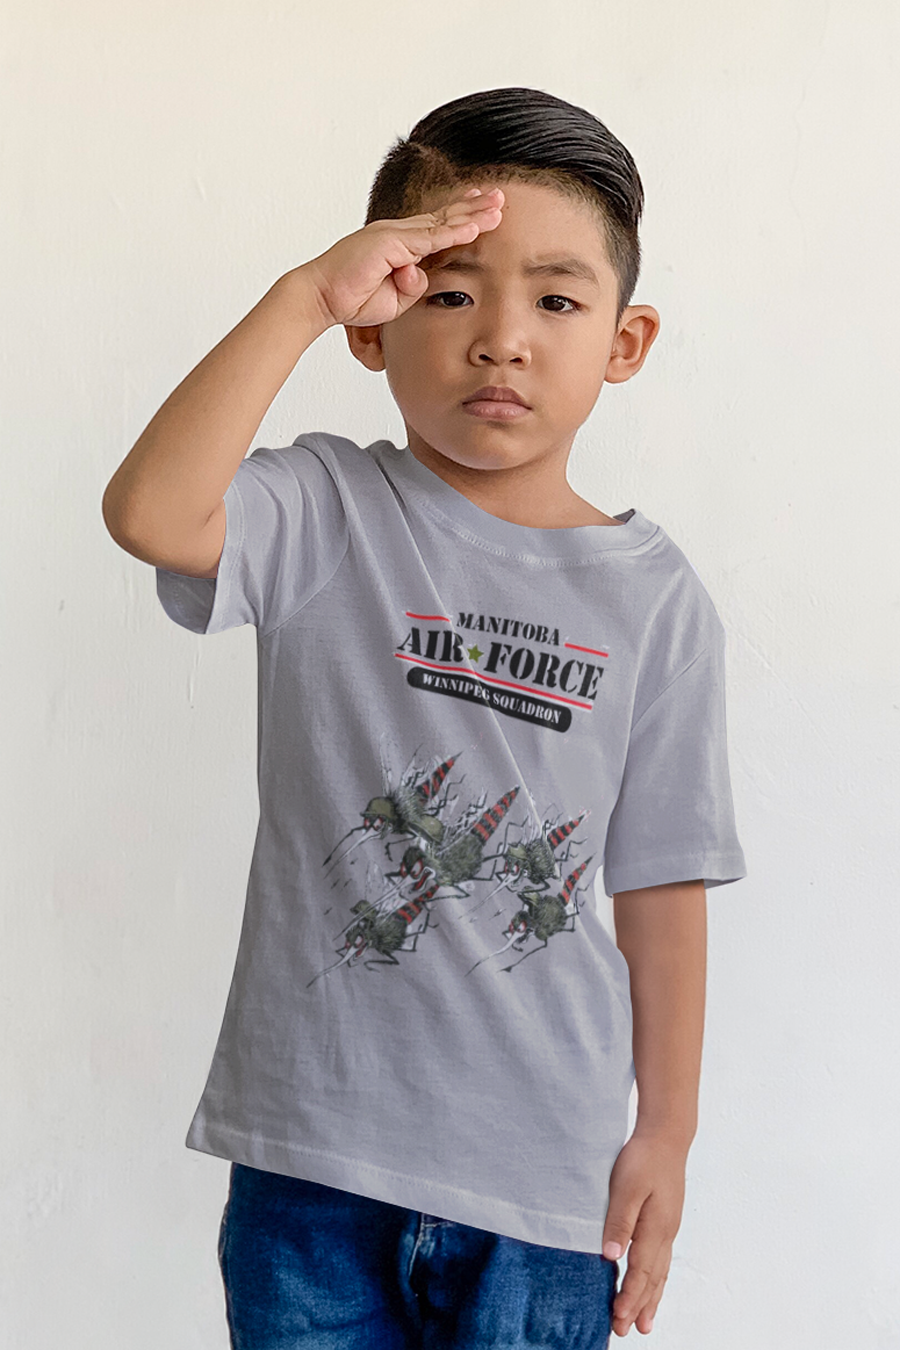 Mosquito Air Force Sport Grey Adult Tee Shirt